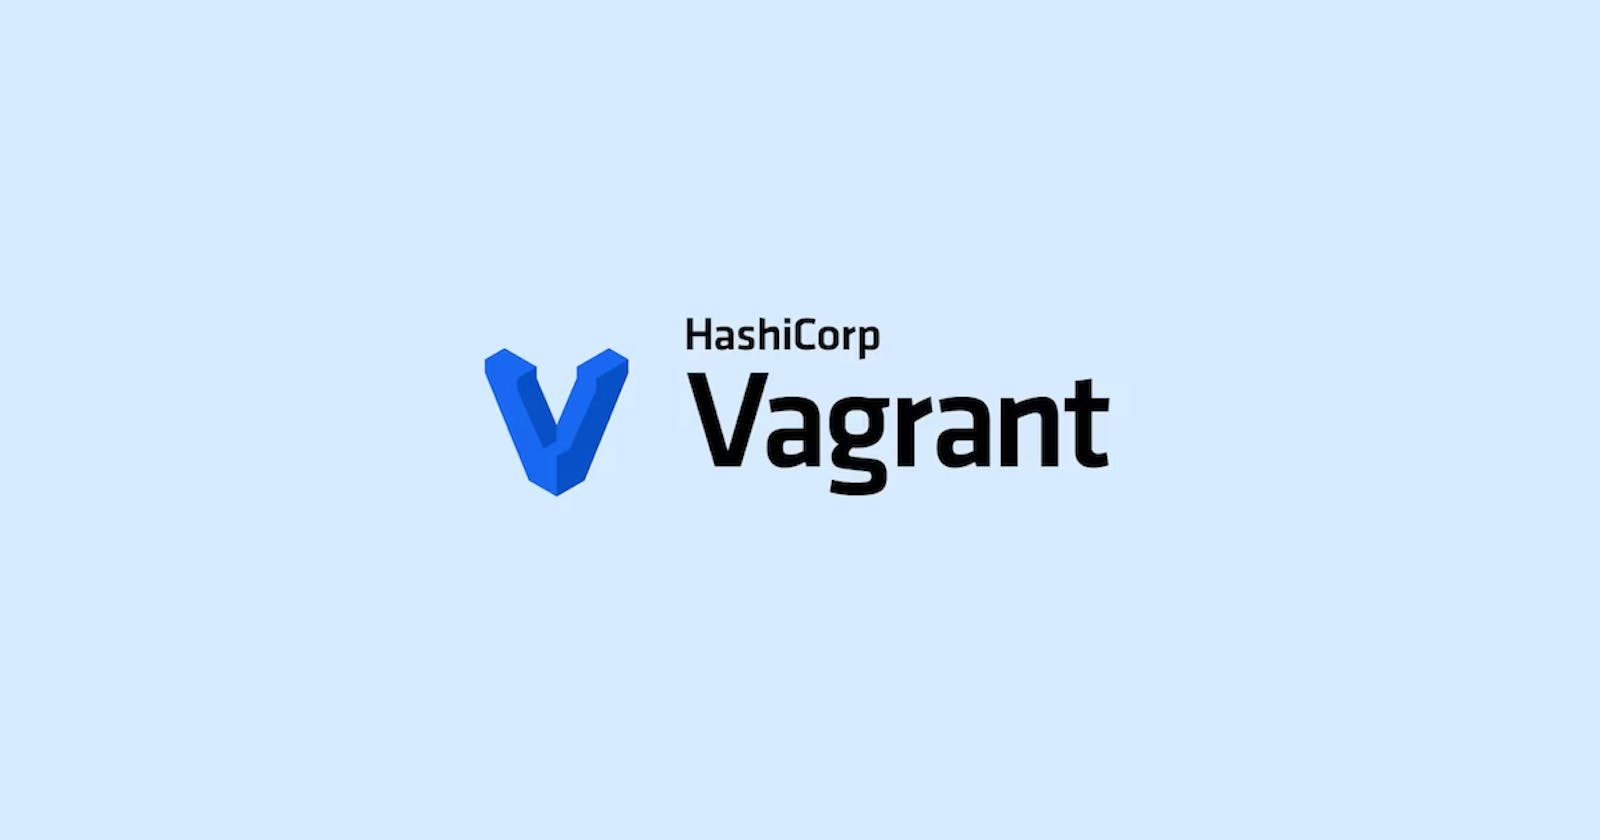 Create and manage VirtualBox VMs with Vagrant